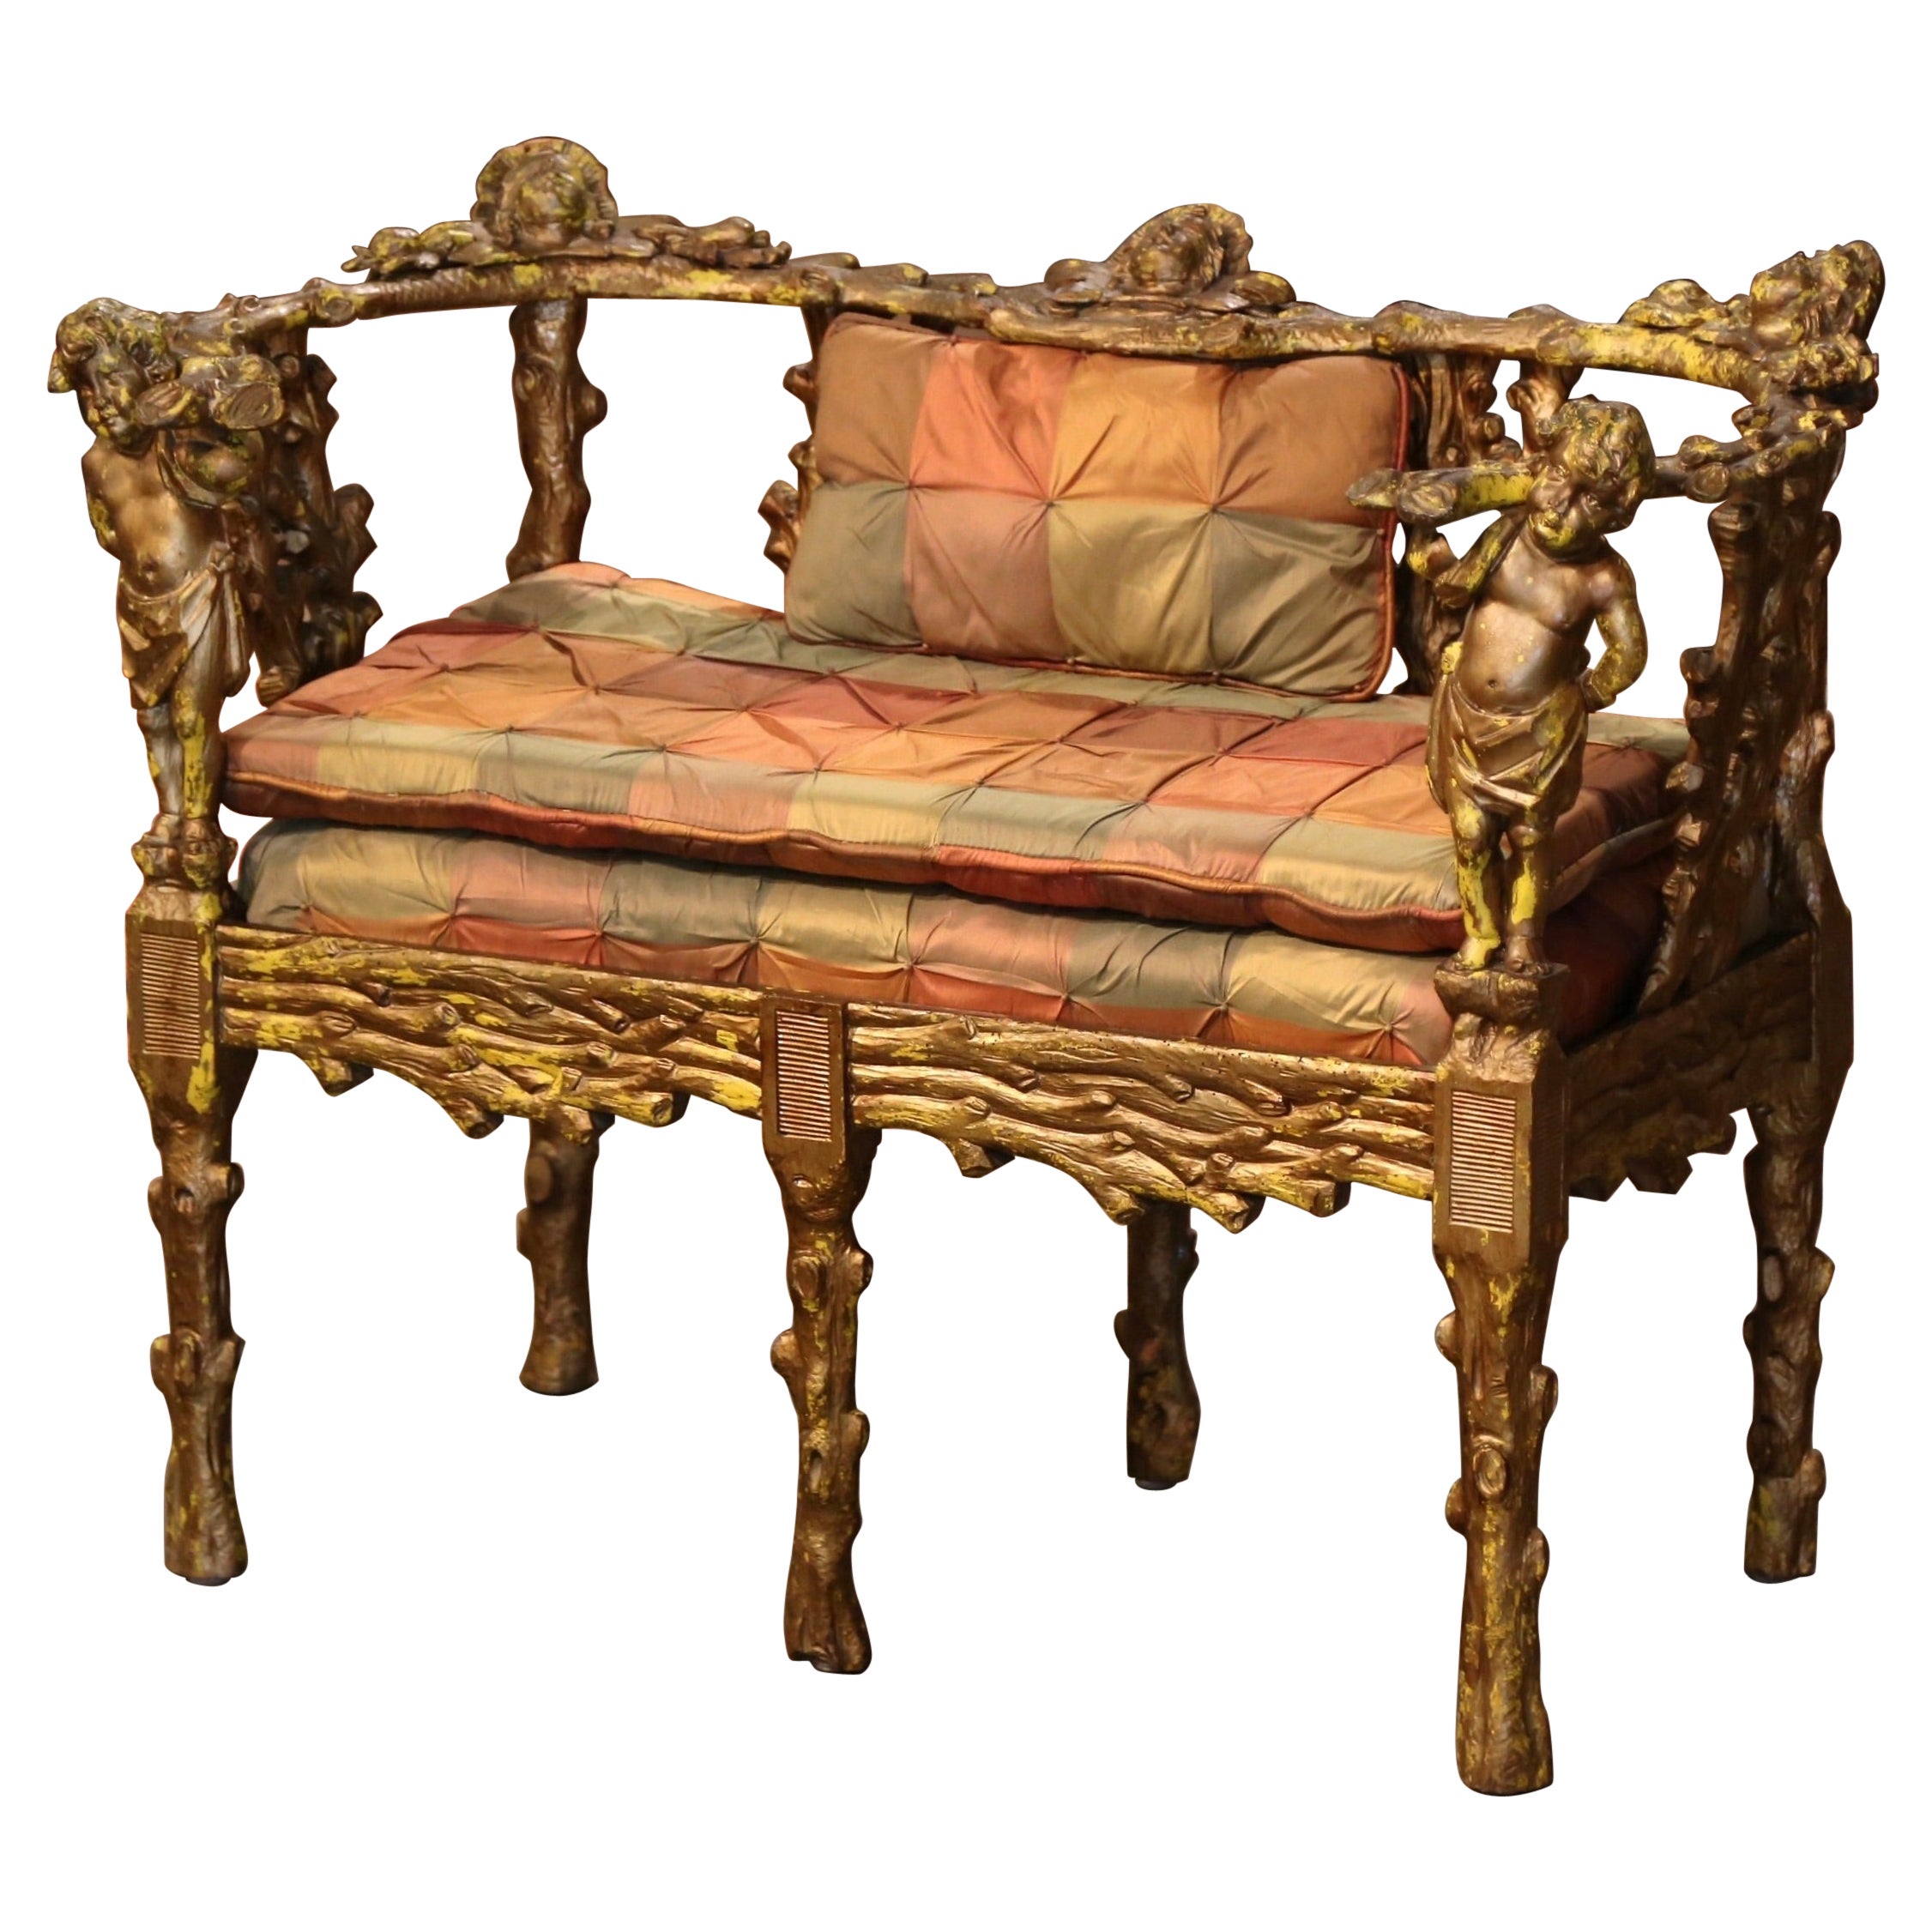 18th Century Italian Carved and Painted Grotto Settee with Silk Cushion & Pillow